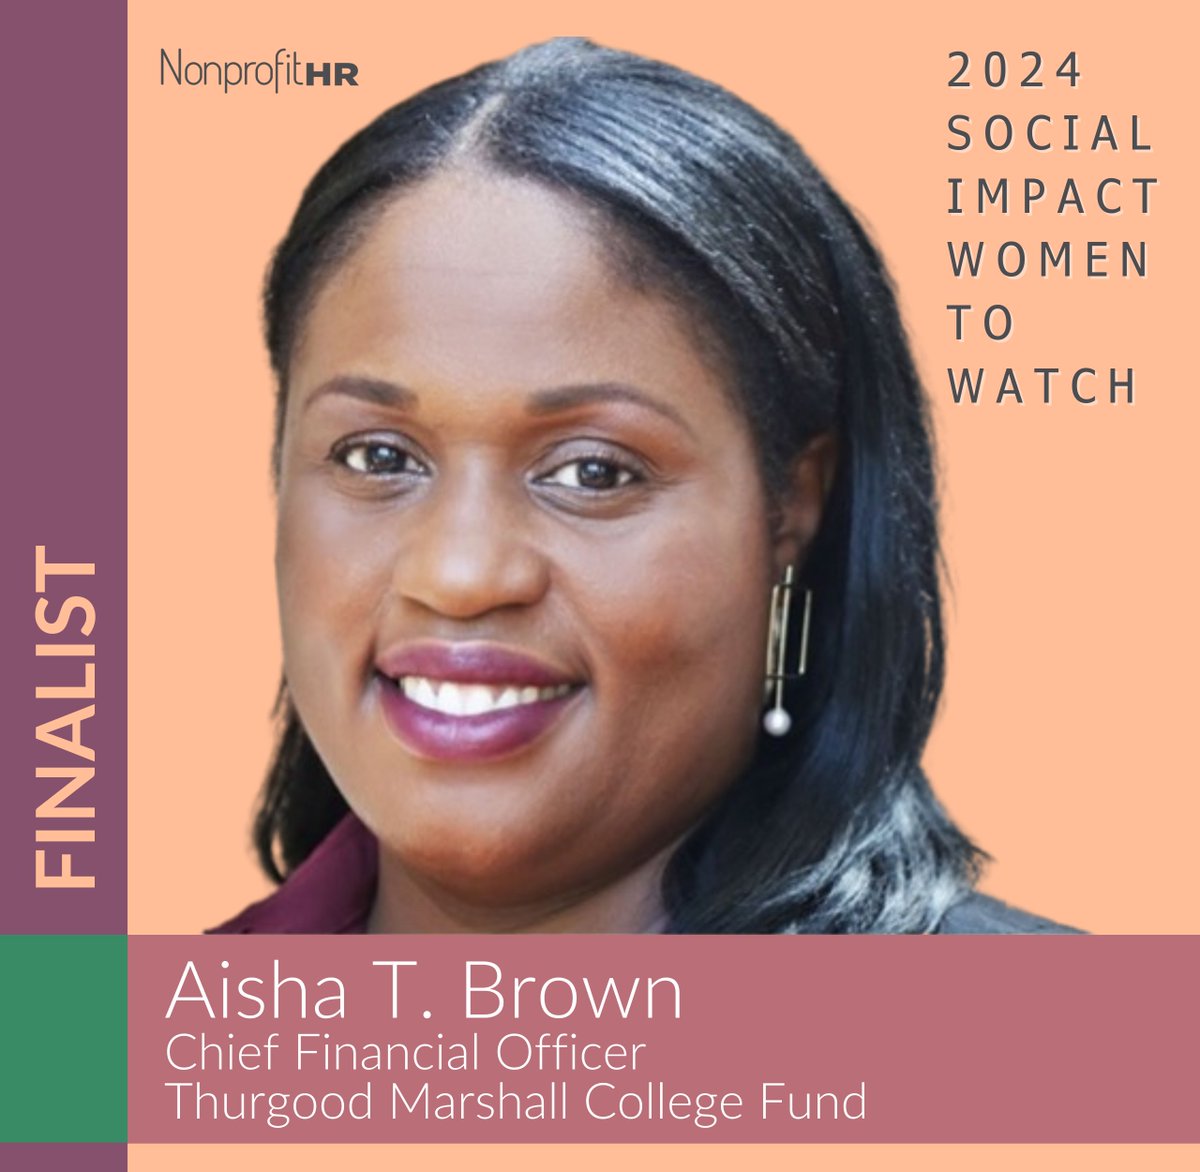 Finalist Spotlight Series: Aisha Brown, CFO at @tmcf_hbcu, bringing nearly two decades of financial management experience. Learn more about Aisha & all the exceptional finalists named to this year's Social Impact Women to Watch List: nonprofithr.com/2024-social-im… #NonprofitHR #2024W2W